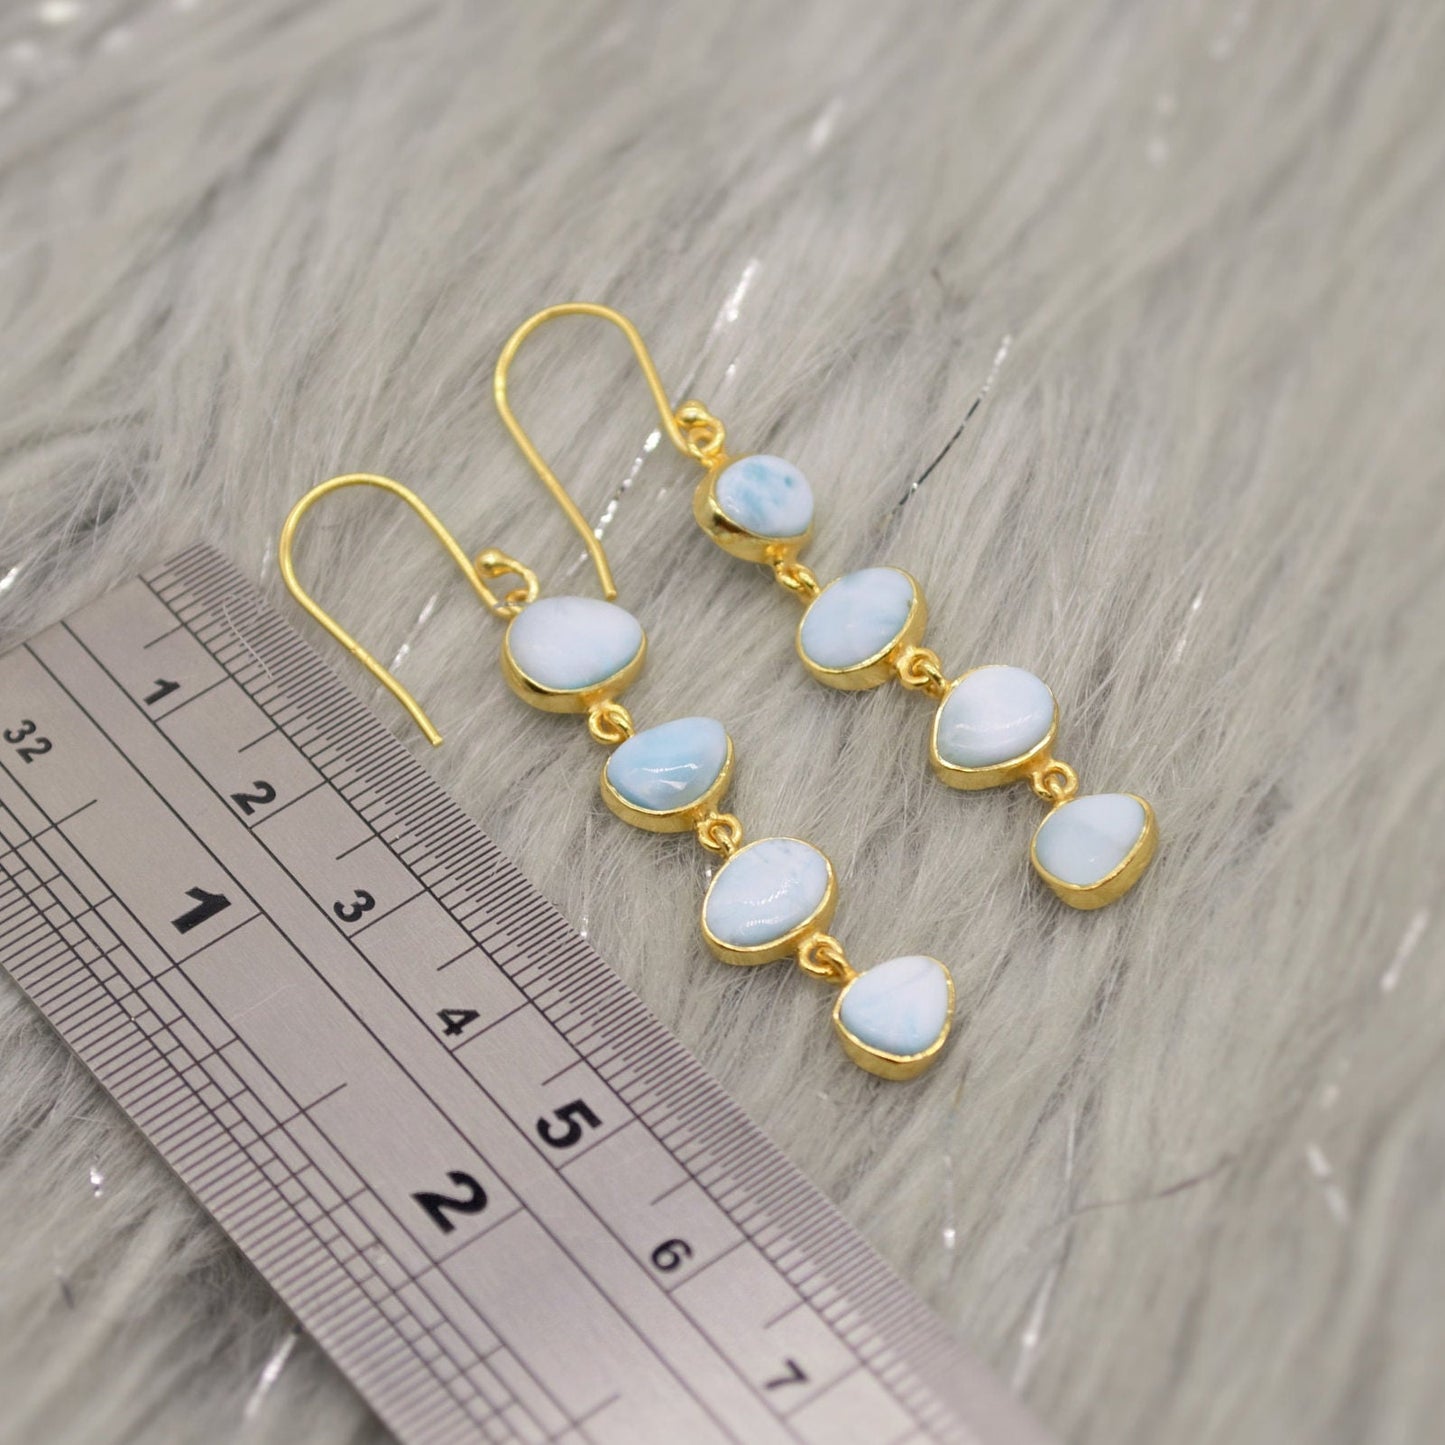 Larimar Dangle Drop Earrings, Gold Plated Sterling Silver Earrings, Blue Larimar Stone, Unique Larimar Gemstone, Handmade Gifts For Her